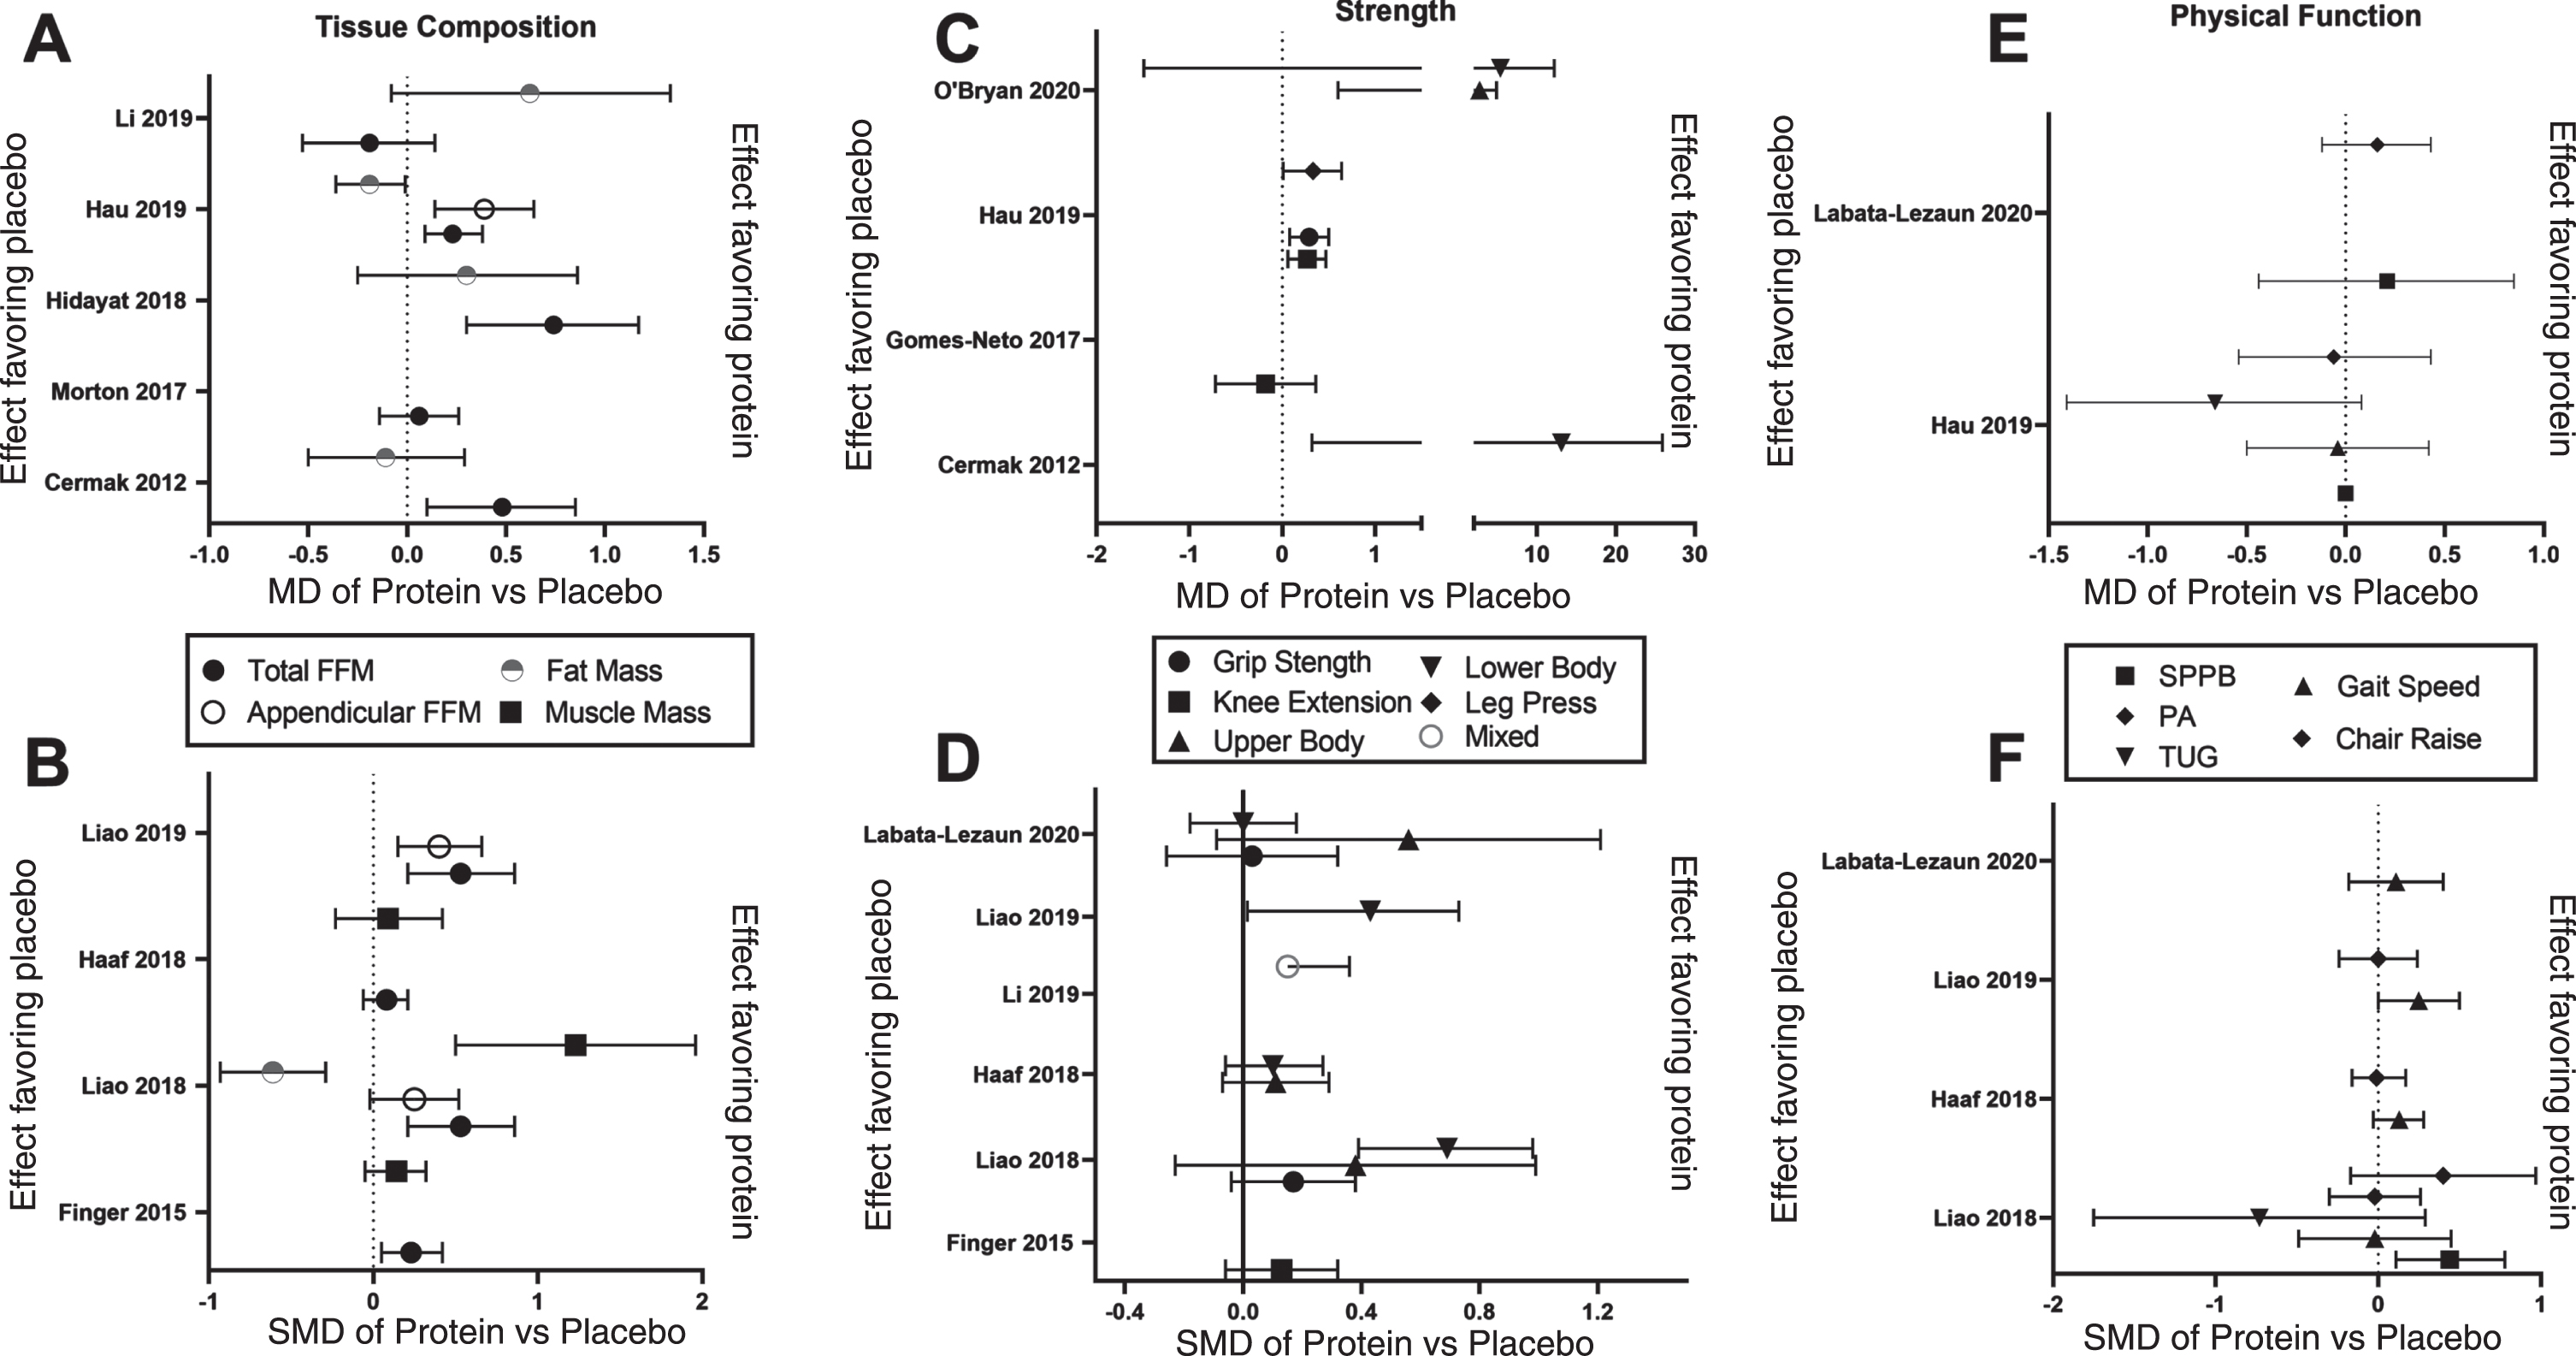 Meta-analysis-calculated effects of protein supplementation and resistance exercise training compared to resistance exercise training with or without placebo in older adults for the outcomes of tissue composition, strength and physical function. Panels A, C and E show the mean difference (MD) of Protein vs Placebo for tissue composition (A), Strength (C) and physical function (C). Panels B, D and F show the standardized mean difference (MD) of Protein vs Placebo for tissue composition (B), Strength (D) and physical function (F). Data are MD or SMD with 95% CI as extracted from each meta-analysis. Effect favoring protein is to the right and the effect favoring placebo is to the left on the x-axis.